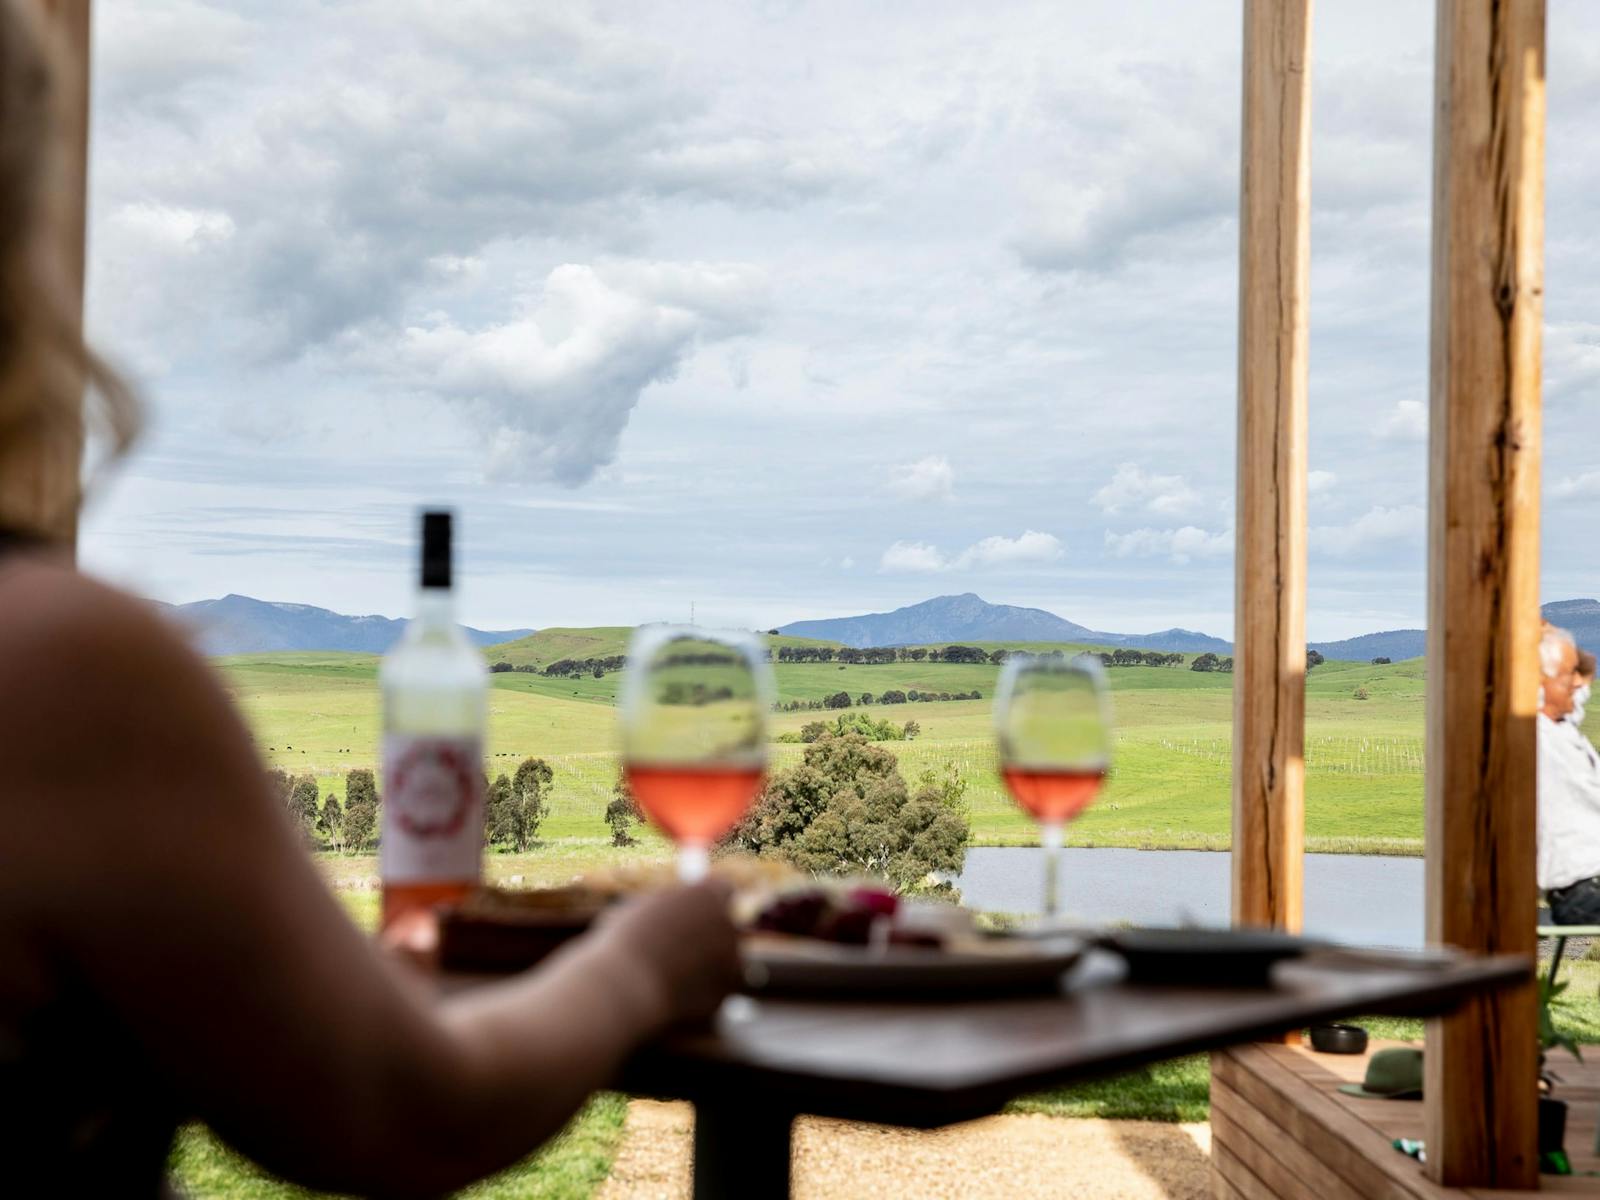 A table with two people, glasses of wine and a platter in front of a view of Mt Buller